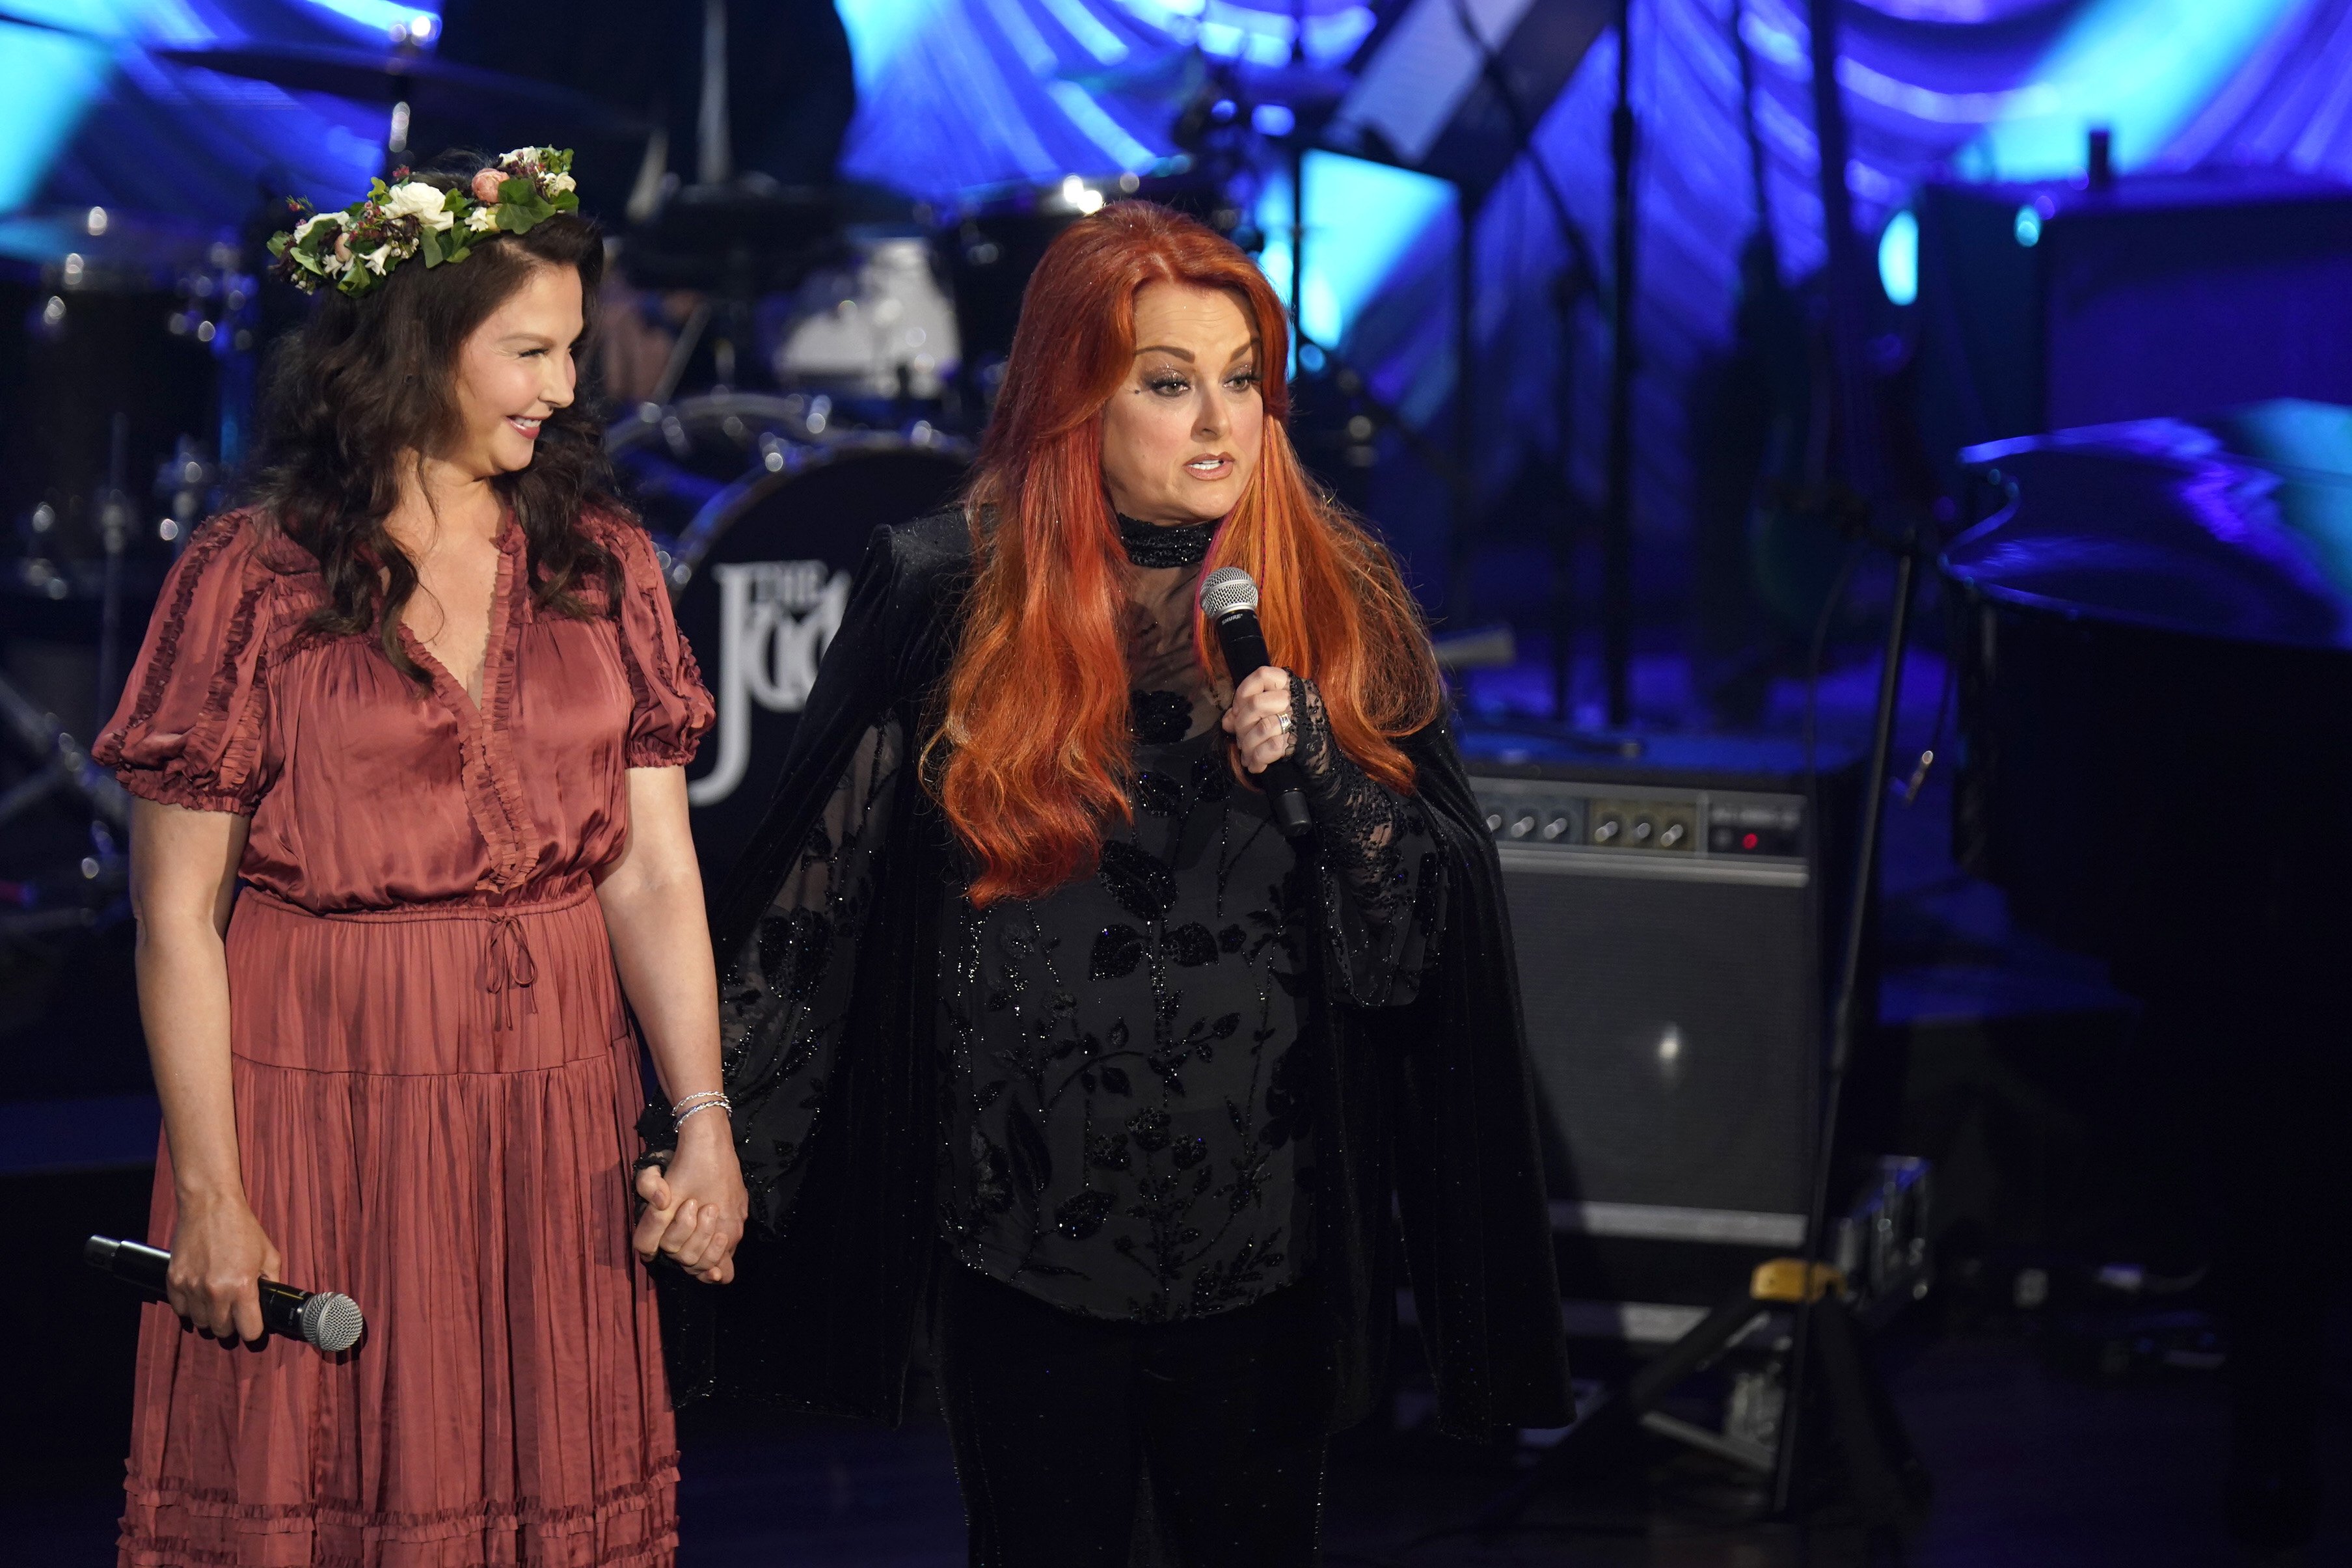 Ashley Judd and Wynonna Judd speaking onstage during Naomi Judd: "A River Of Time" Celebration at Ryman Auditorium on May 15, 2022 in Nashville, Tennessee. | Source: Getty Images